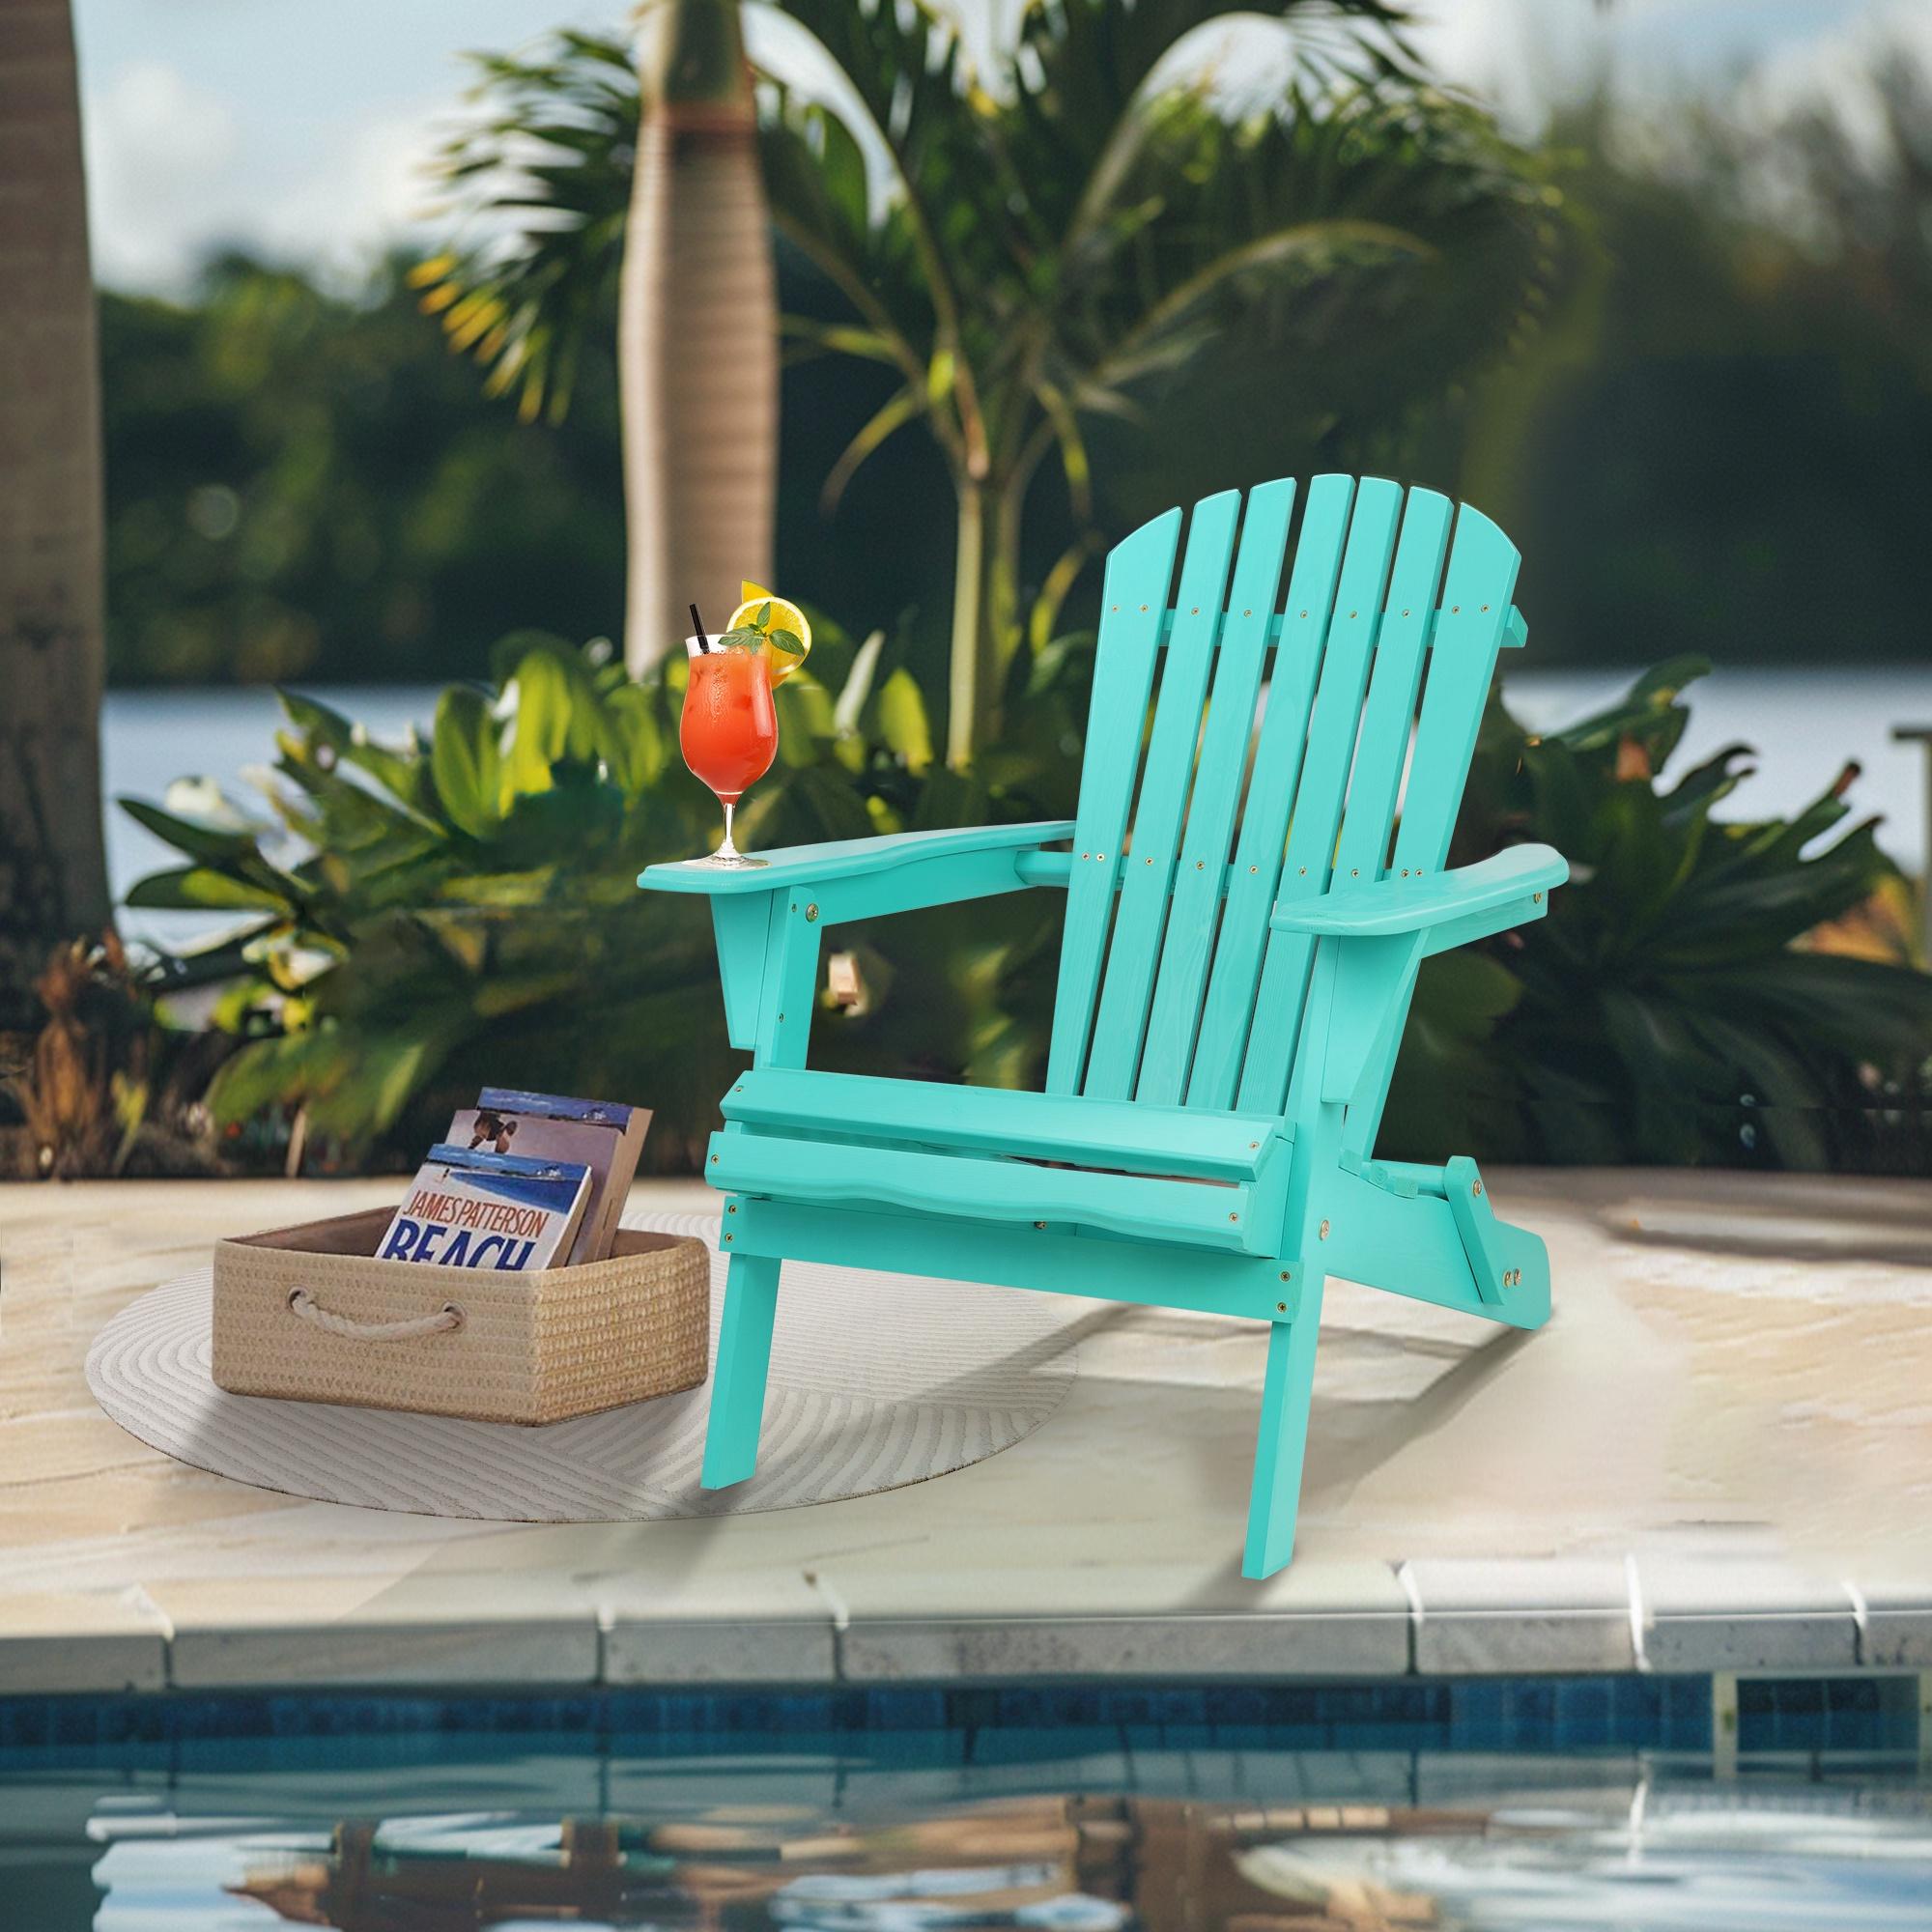 Outdoor Adirondack Chair, Seizeen Wooden Folding Adirondack Chair, Patio Furniture Lounge Chair Quick Assembled, Outdoor Chairs for Deck Pool Yard Garden, Cyan - image 3 of 8